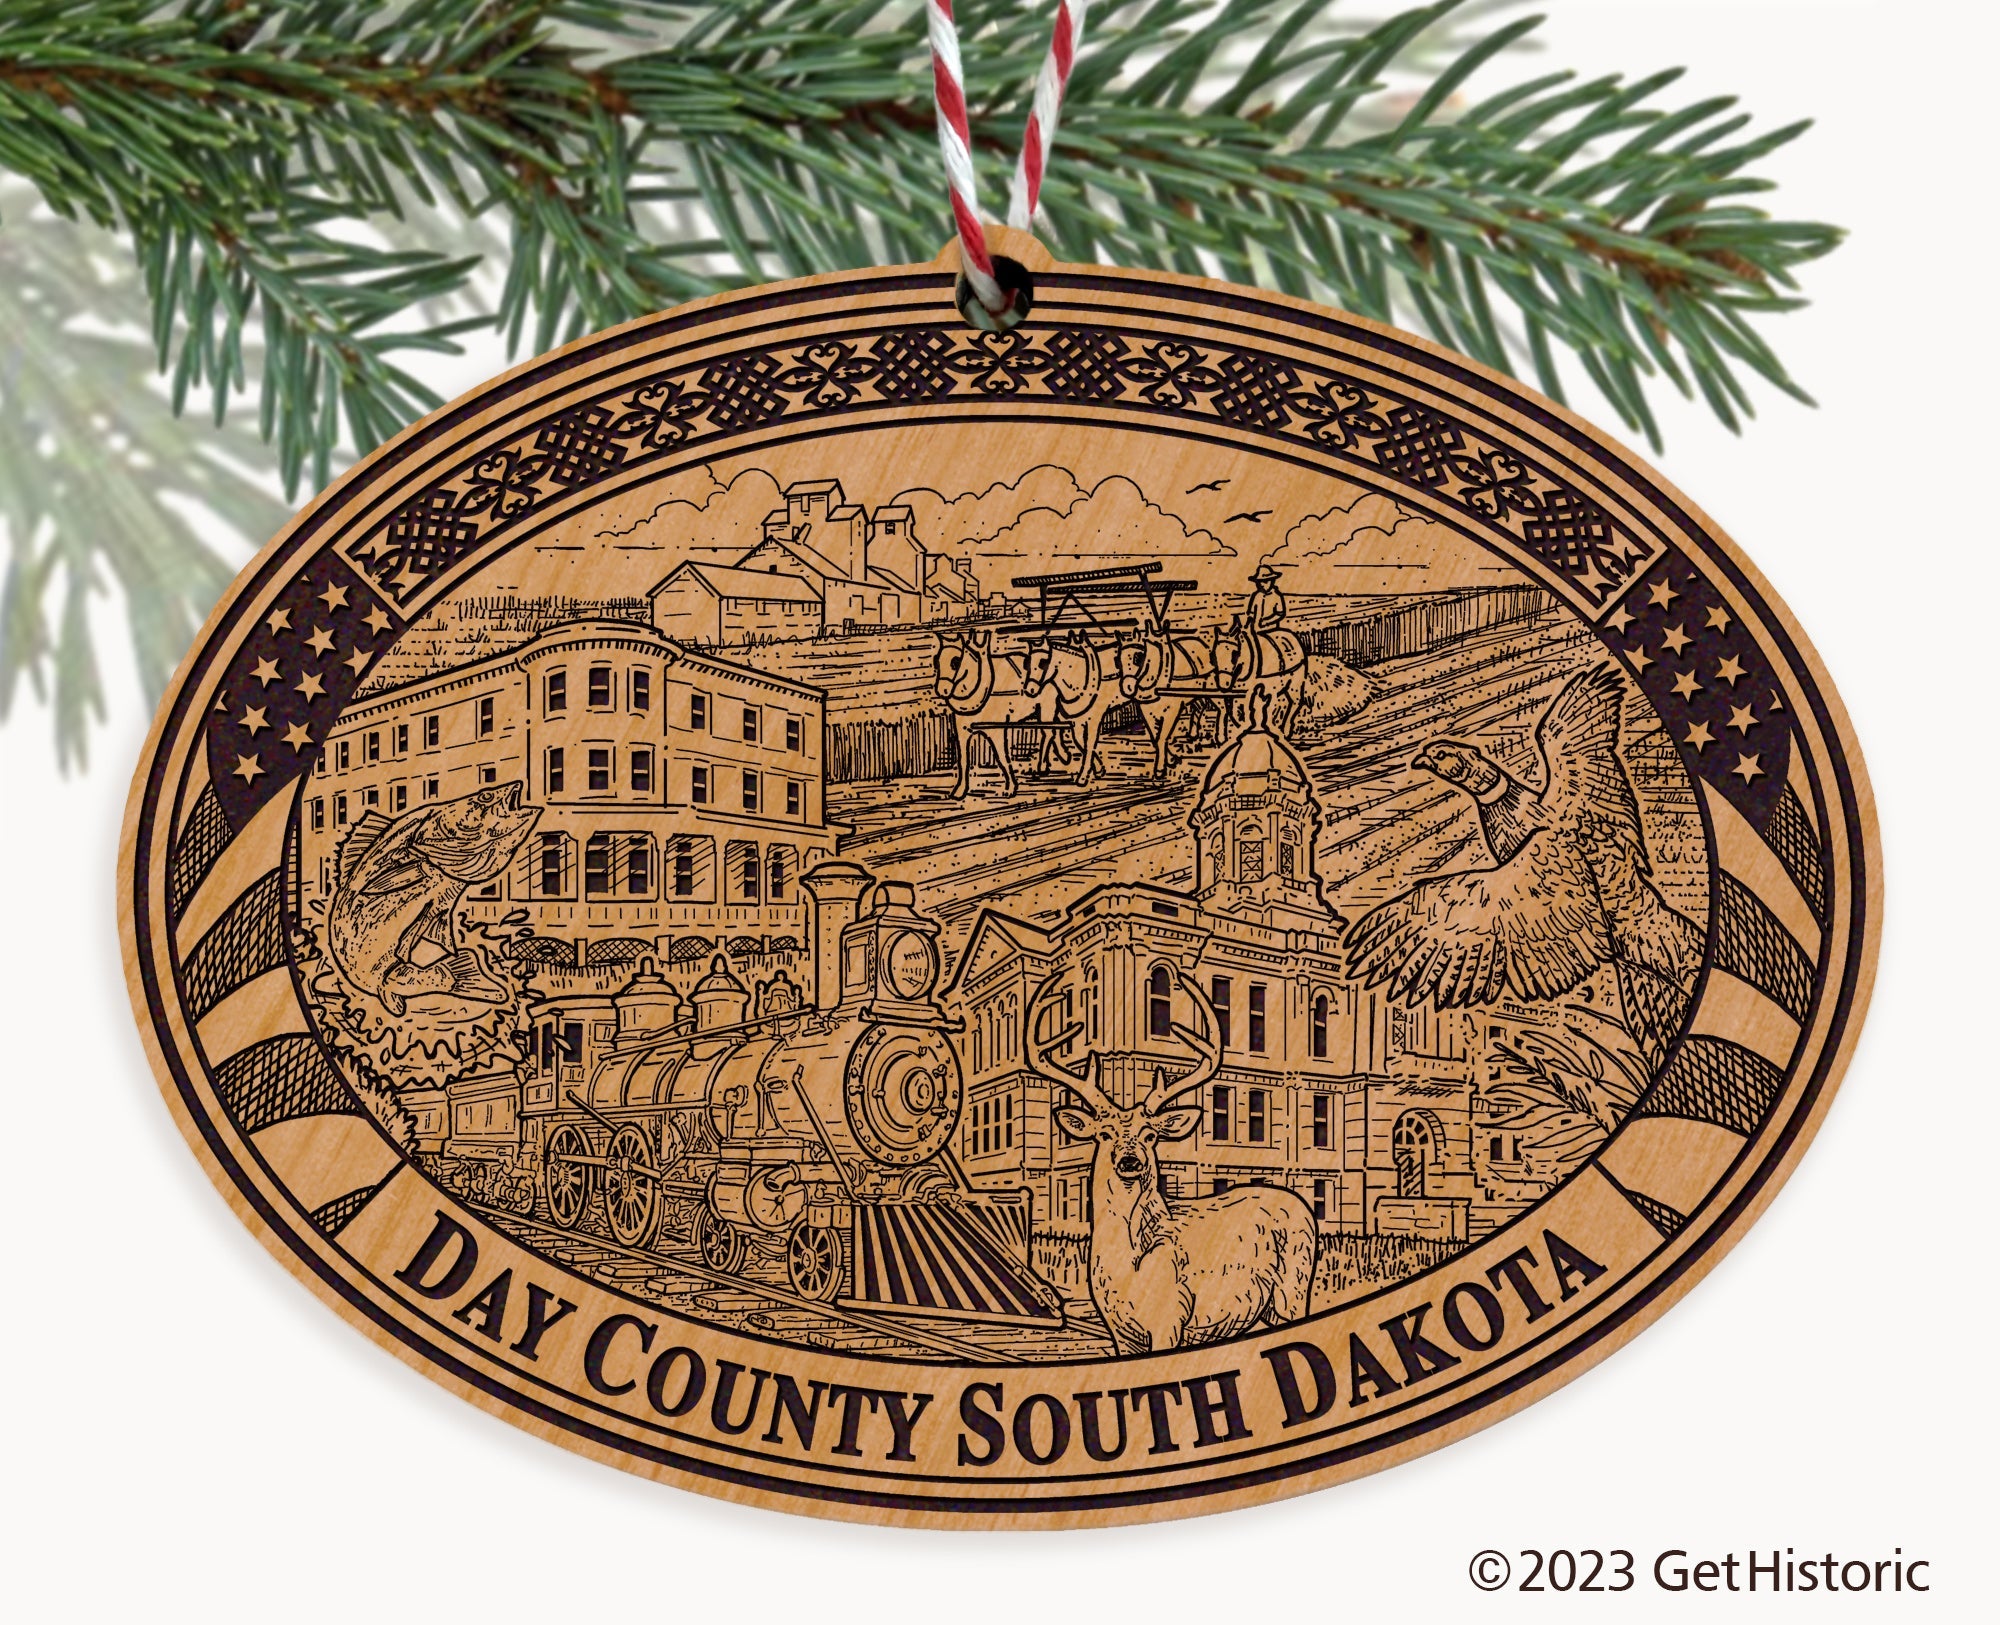 Day County South Dakota Engraved Natural Ornament